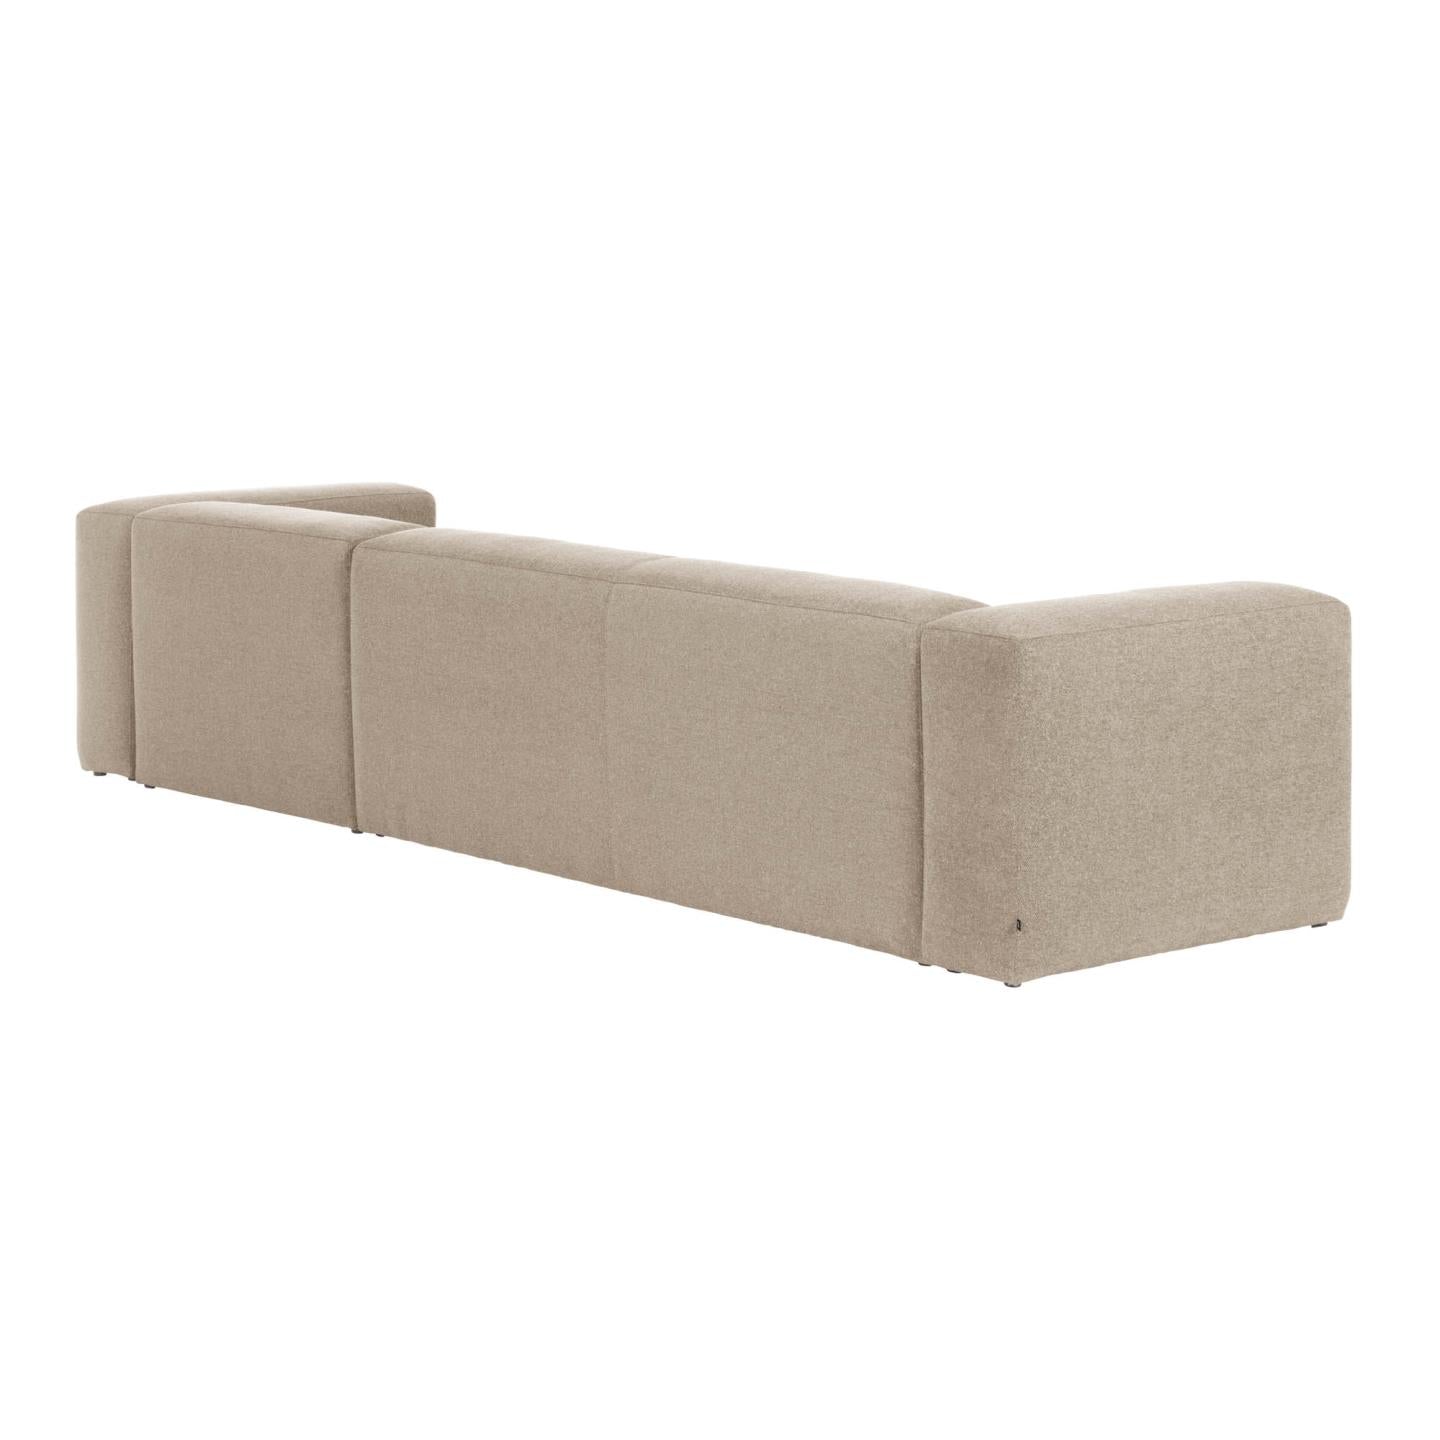 Blok 4 seater sofa with right-hand chaise longue in beige, 330 cm